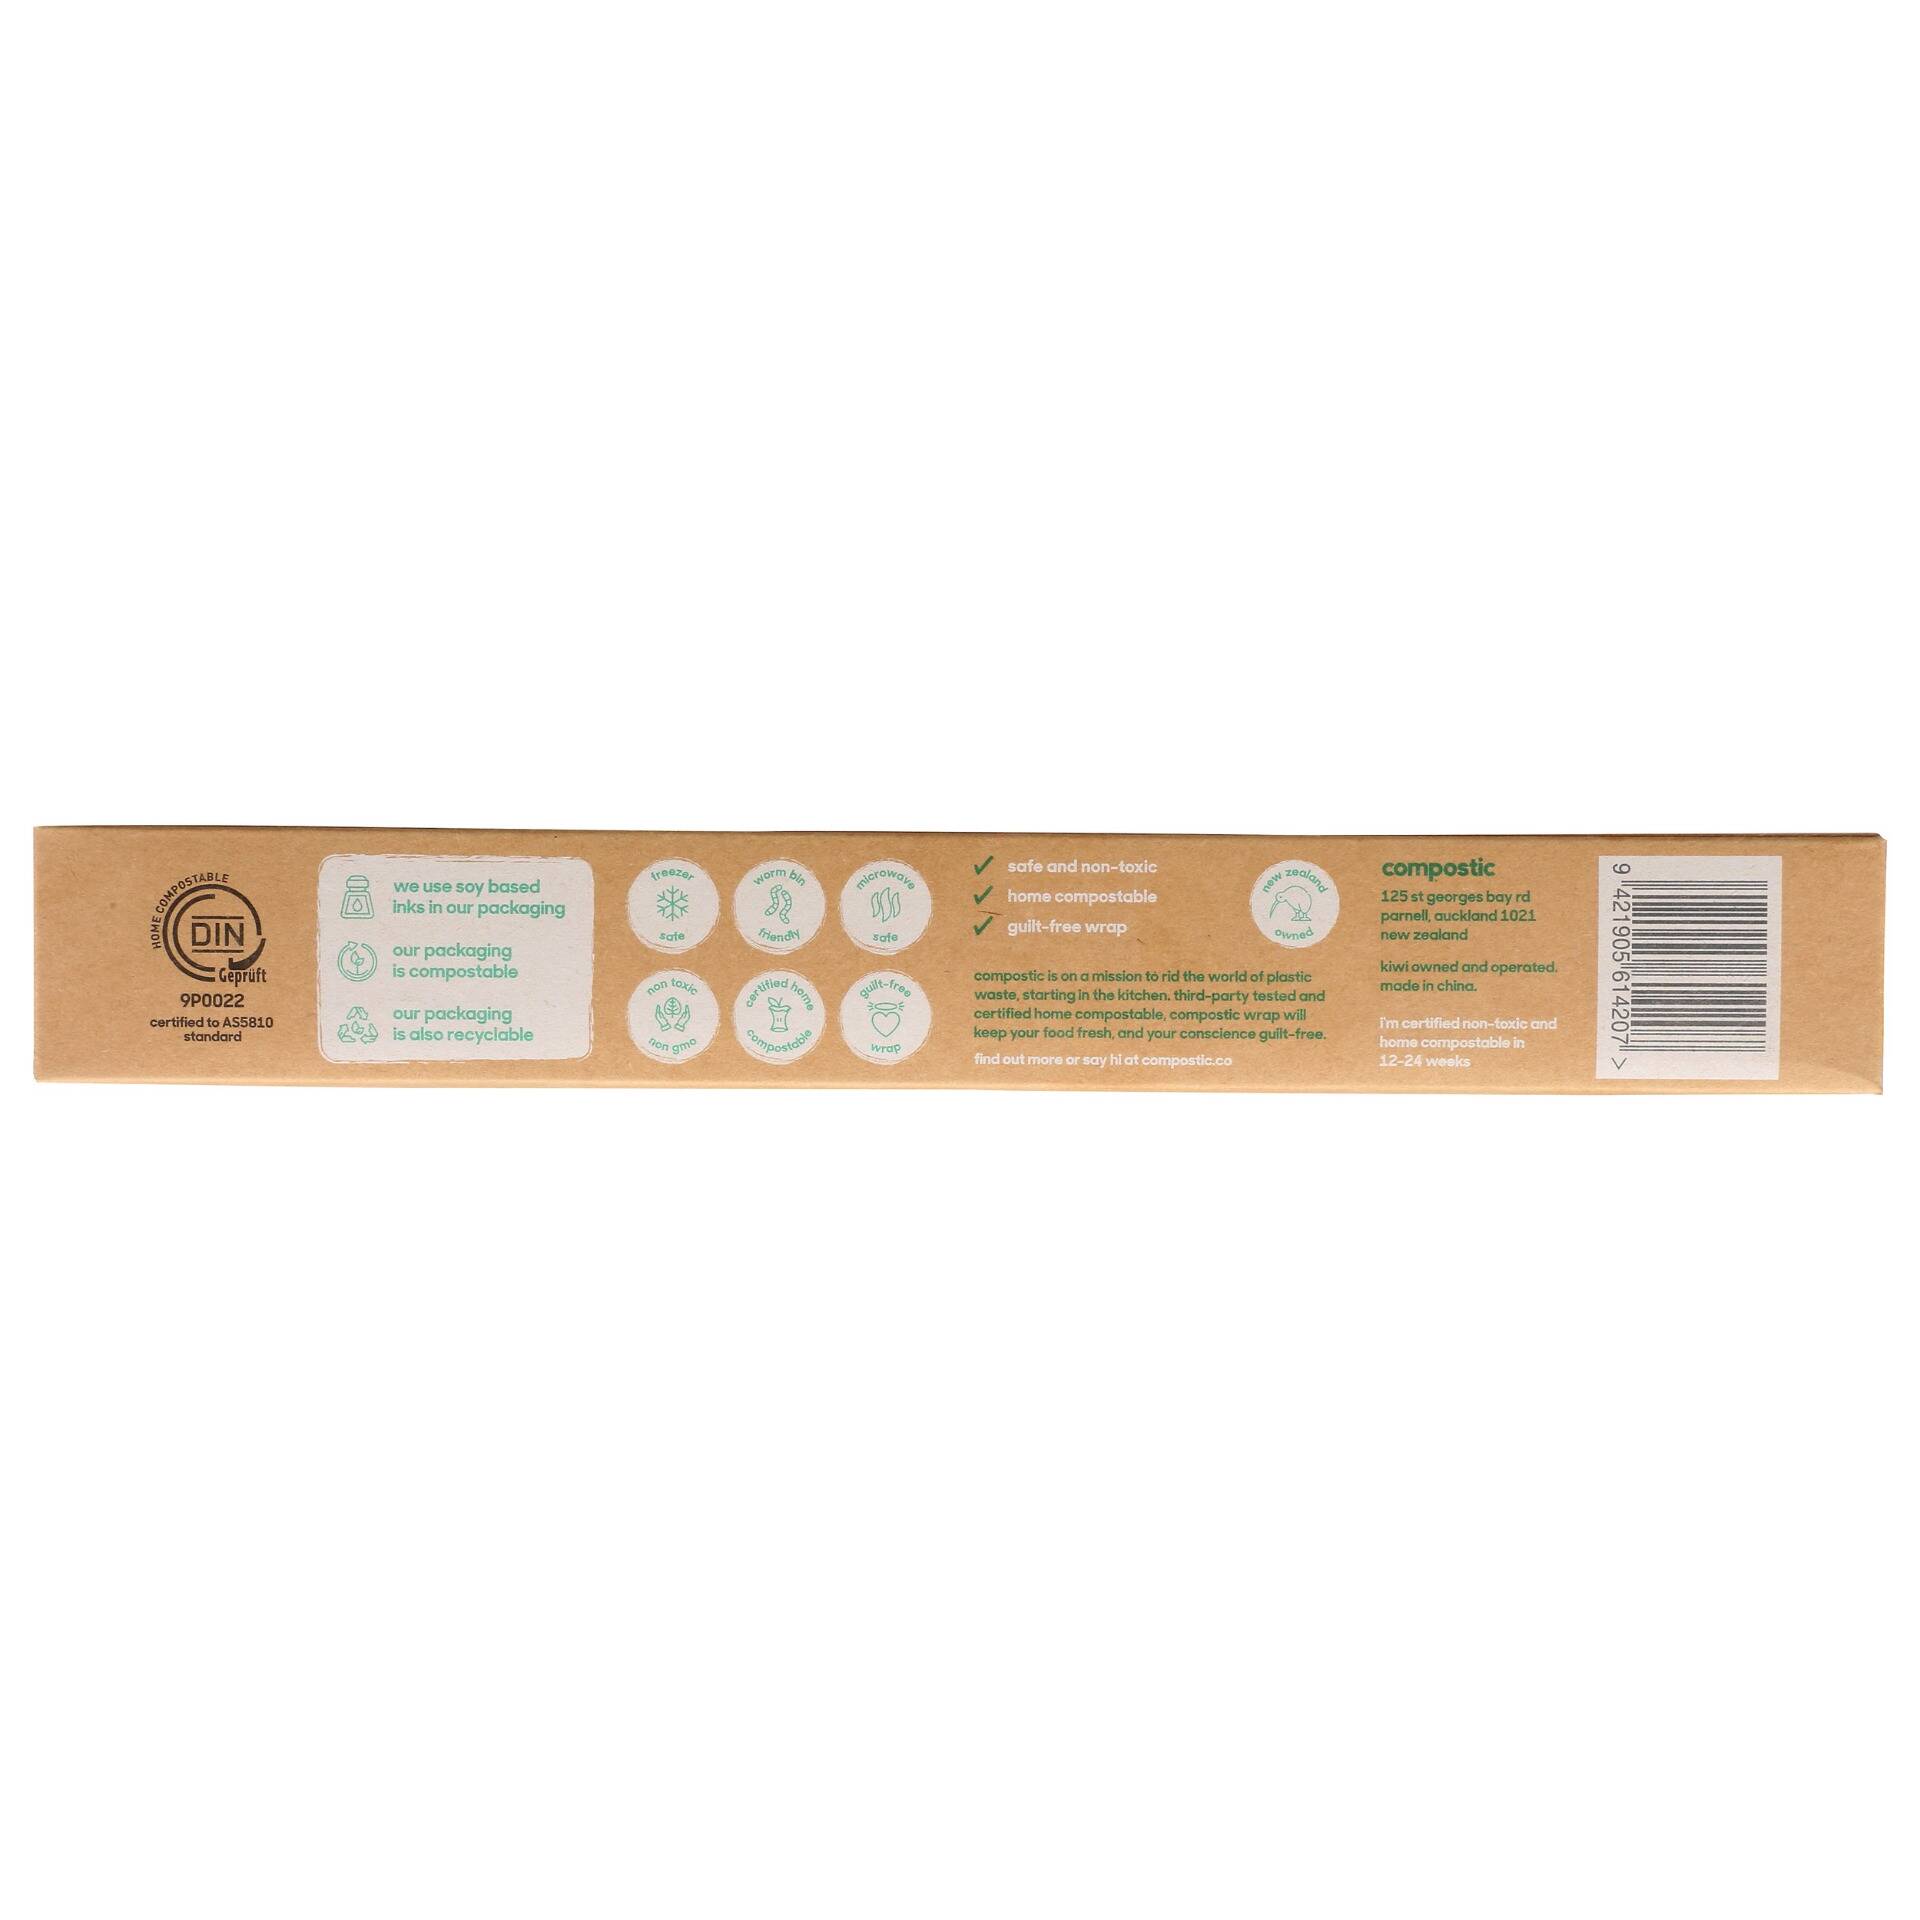 Compostic Cling Wrap Compostible, 250 feet